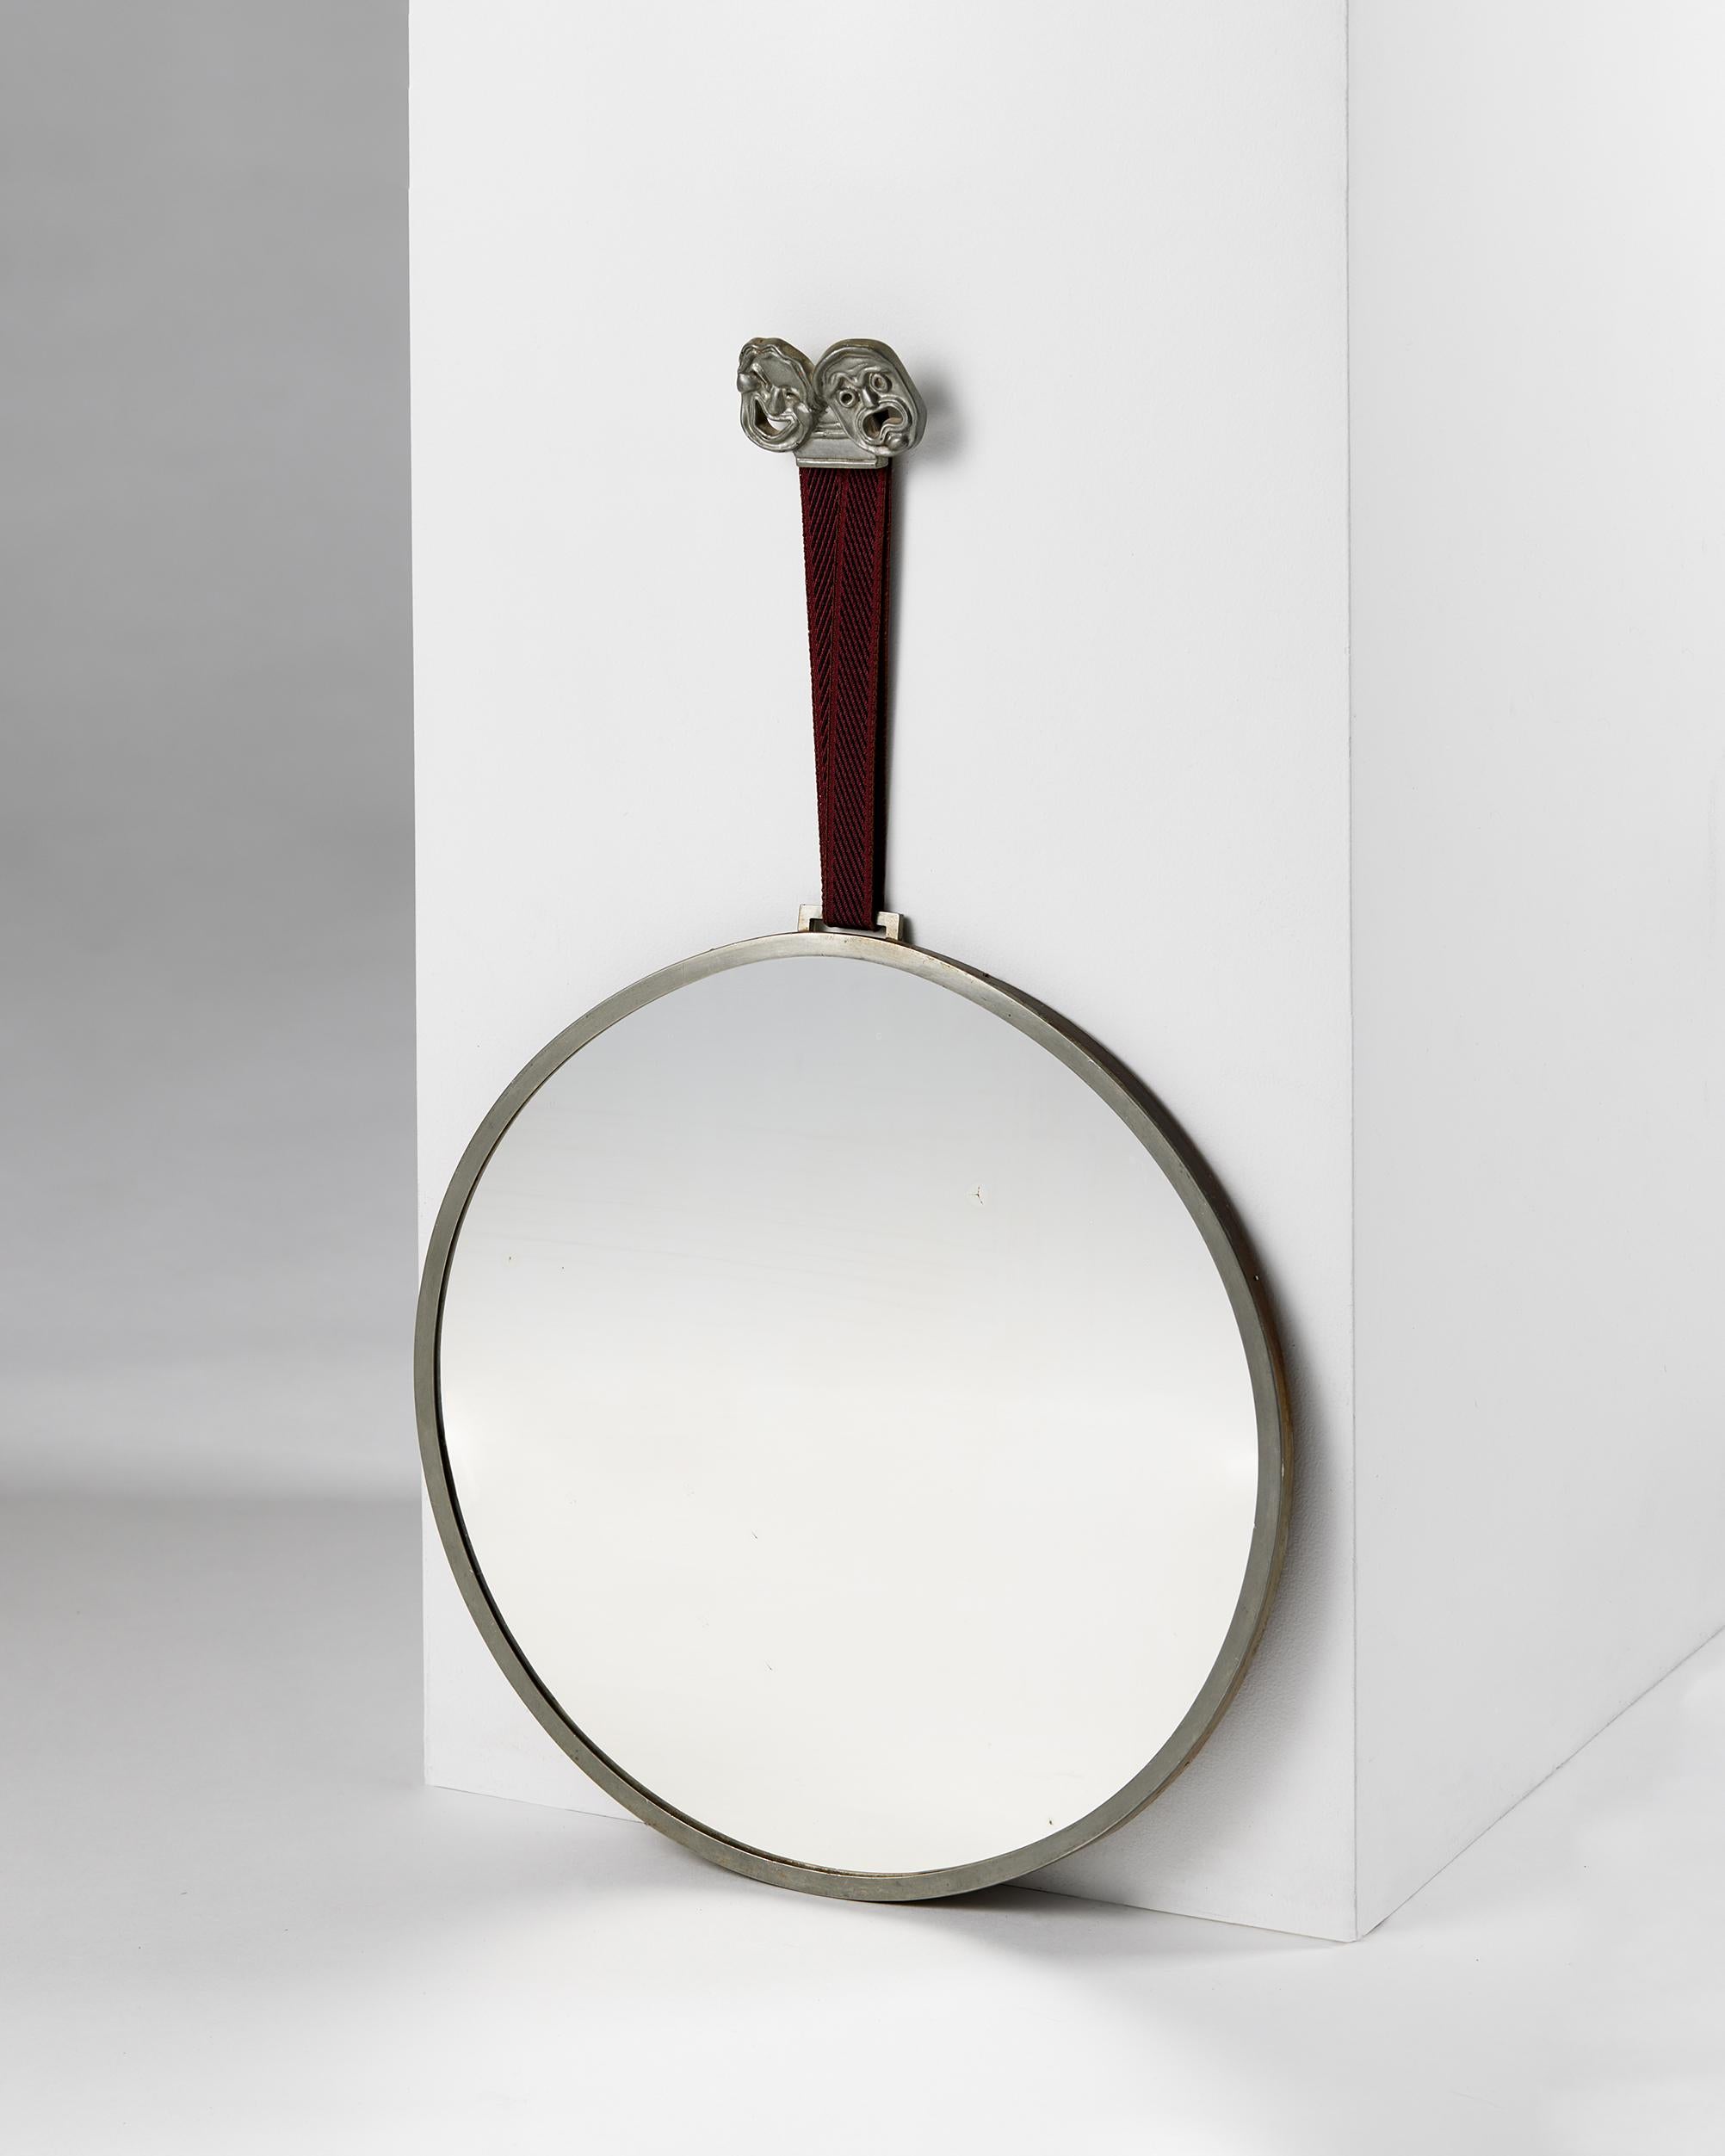 Wall mirror designed by Hans Bergström for Ystad Metall,
Sweden, 1932.

Stamped.

Pewter, textile, and mirrored glass.

H: 57.5 cm
Diameter: 35 cm